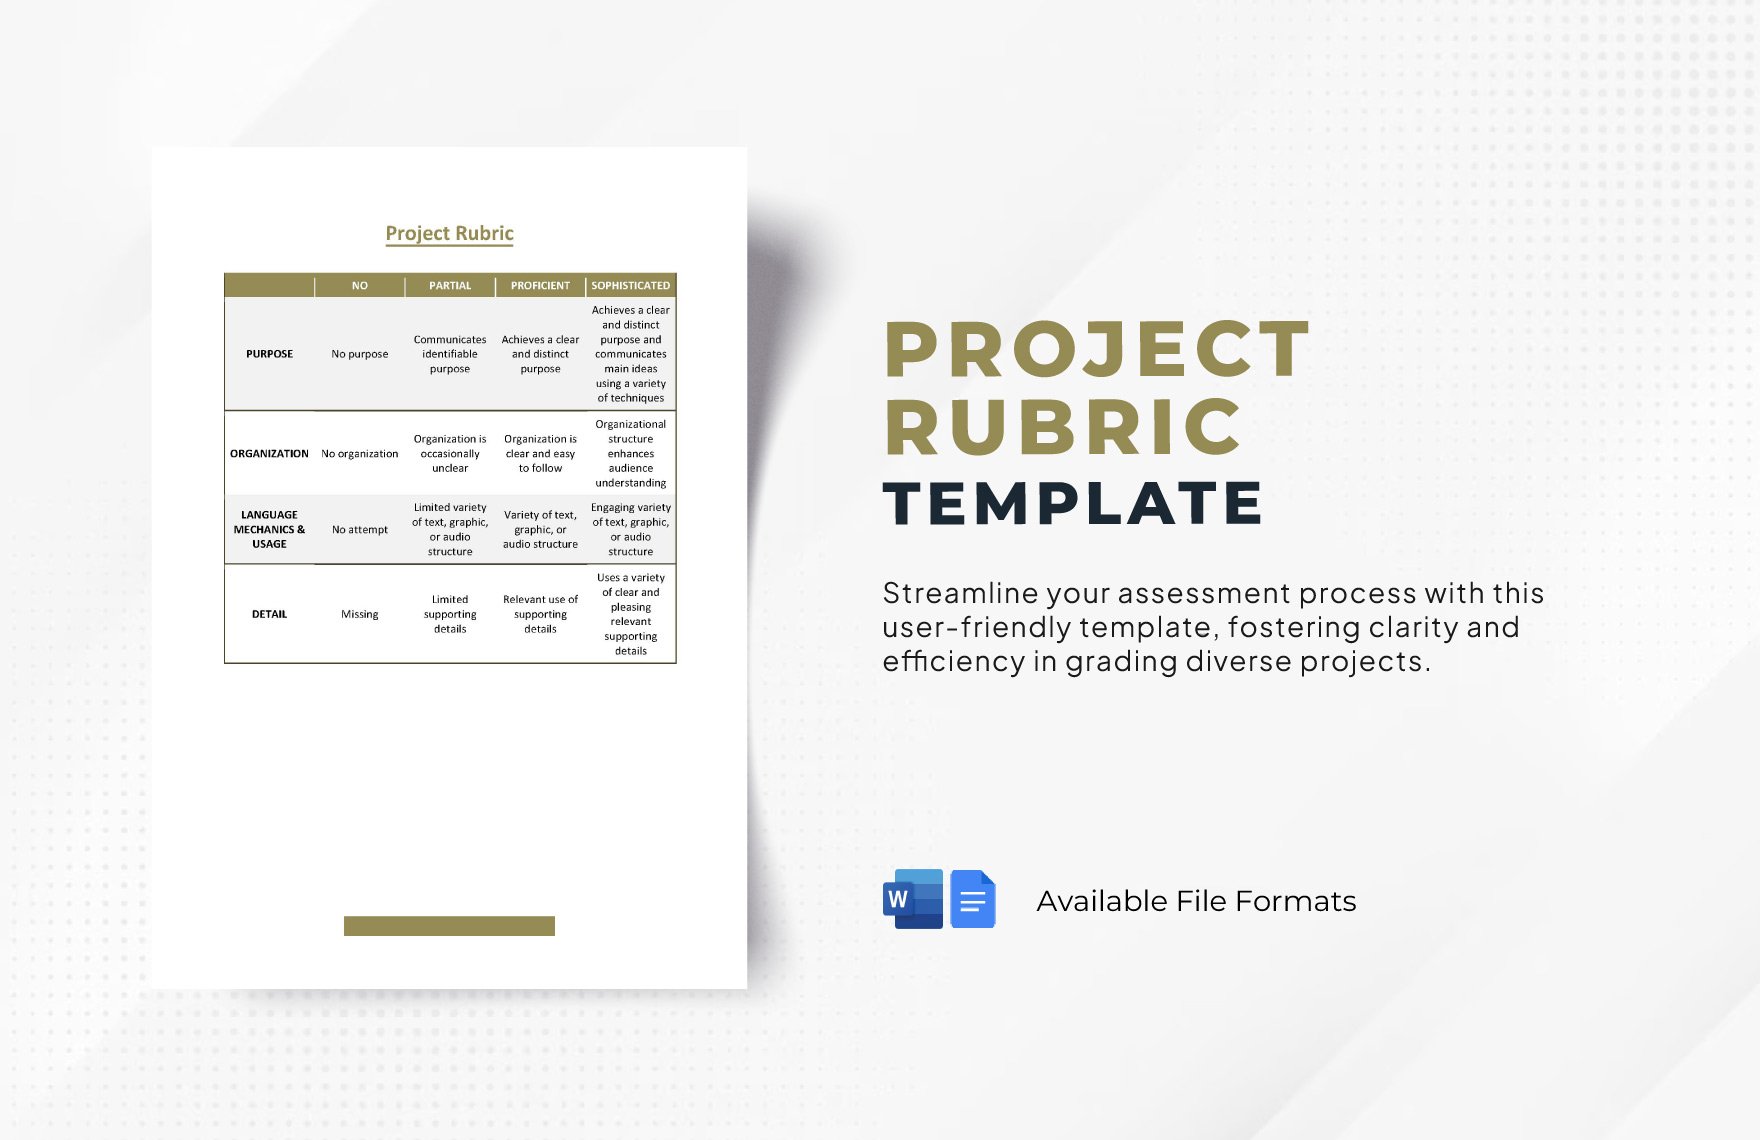 Project Rubric Template in Word, Google Docs